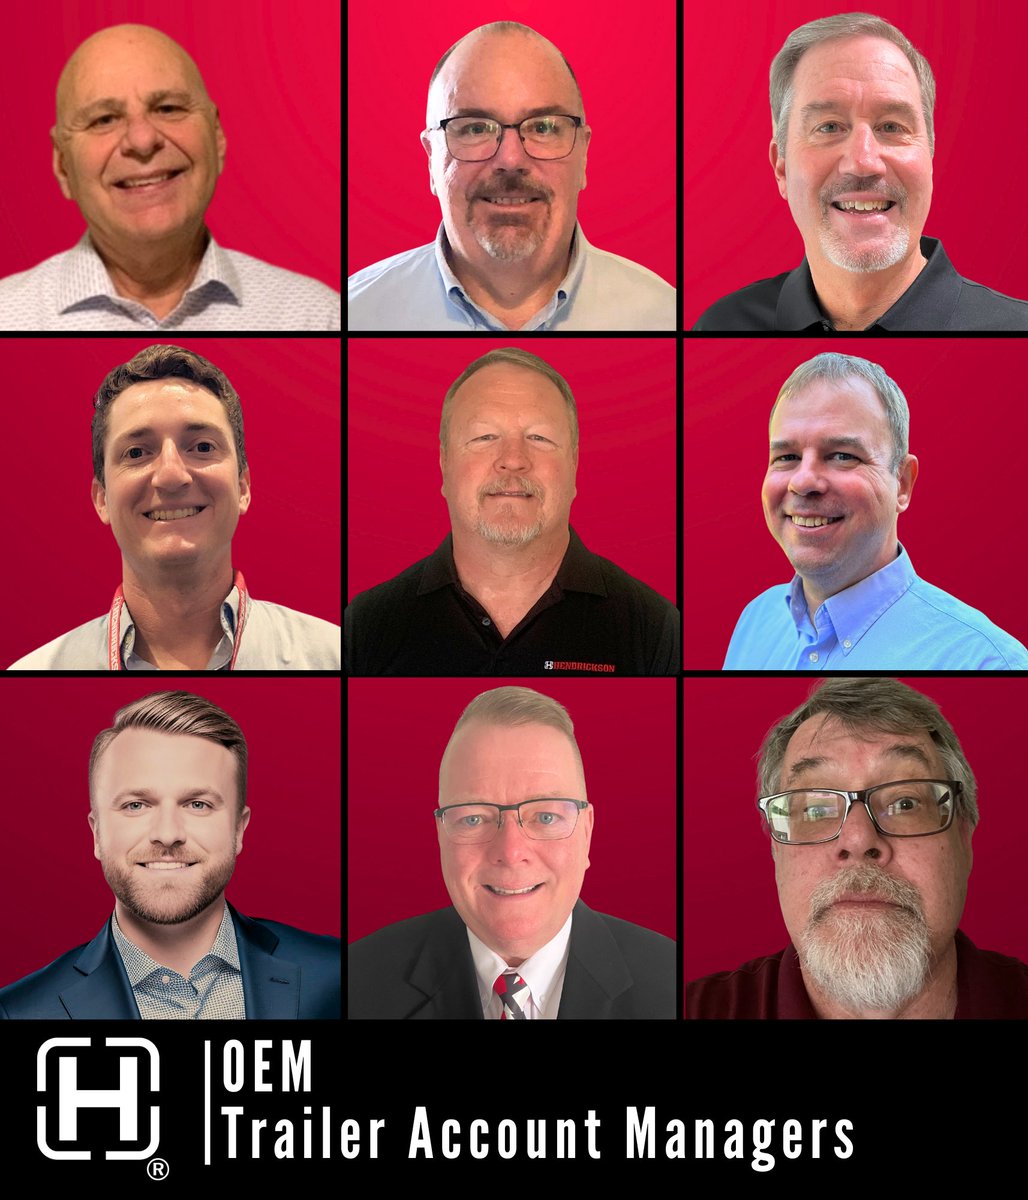 Led by seasoned professionals with a passion for customer satisfaction, our Trailer Account Management team is the cornerstone of our relationships with OEM partners. Join us in thanking our OEM Trailer Account Management team!

#TeamAppreciation #DrivingExcellence